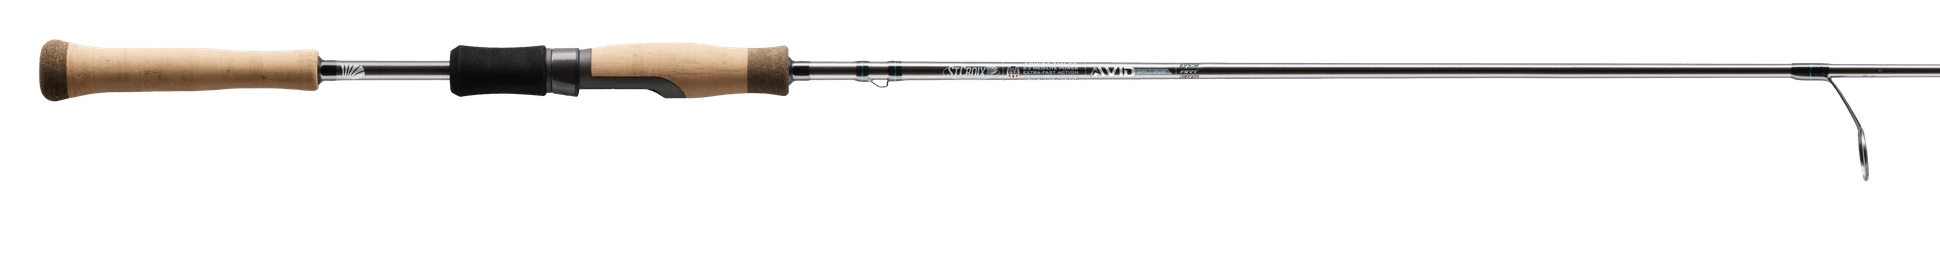 St.Croix Avid Walleye Spinning Rods